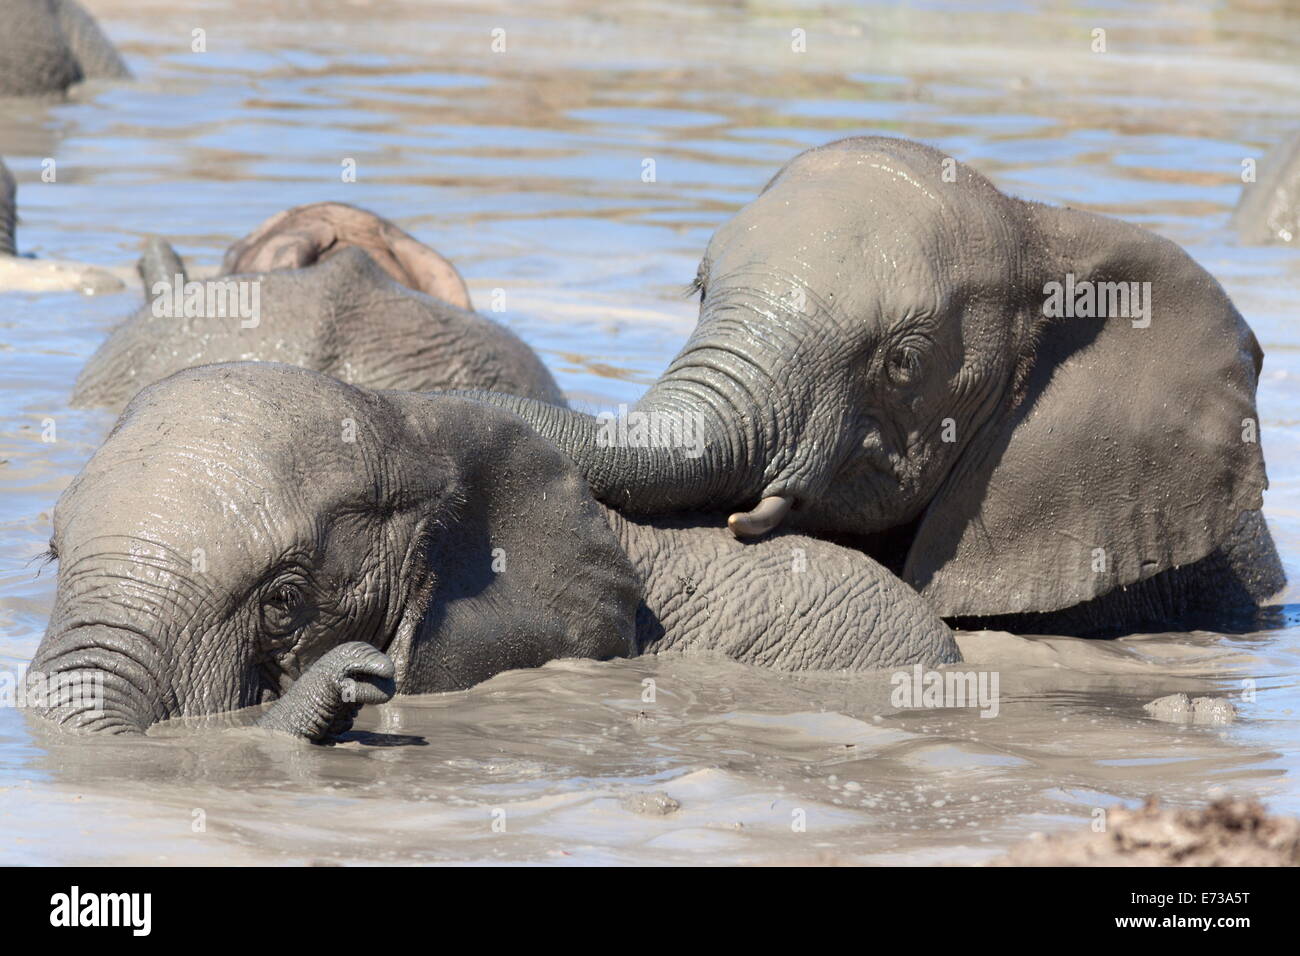 Elephants (Loxodonta africana) playing in water, Addo Elephant National Park, South Africa, Africa Stock Photo